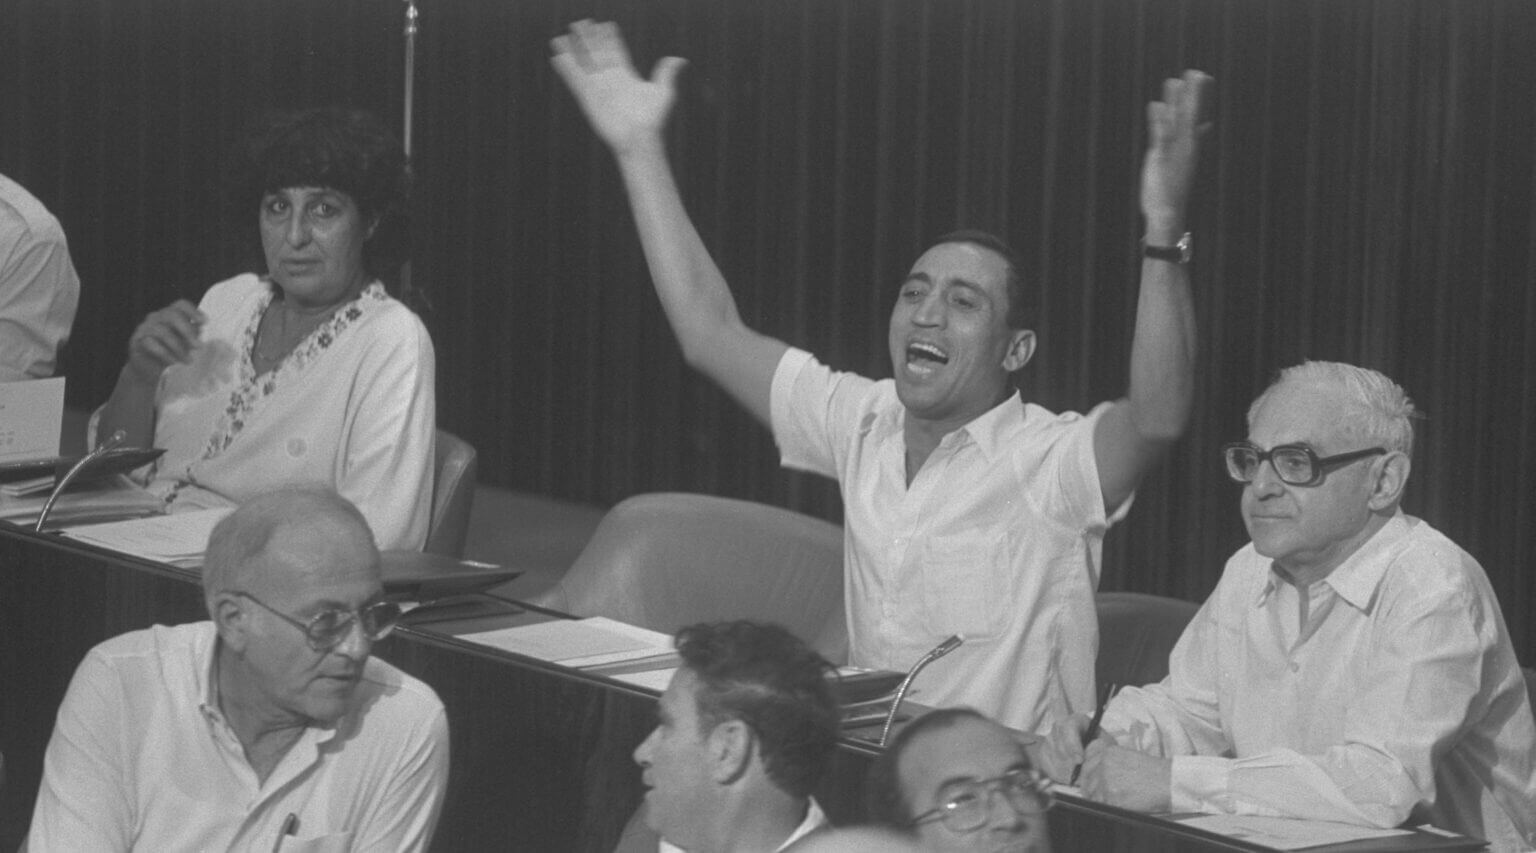 Israeli lawmaker Charlie Biton raises his arms in one of his spirited interjections during parliamentary debate in Jerusalem, Oct. 10, 1983.